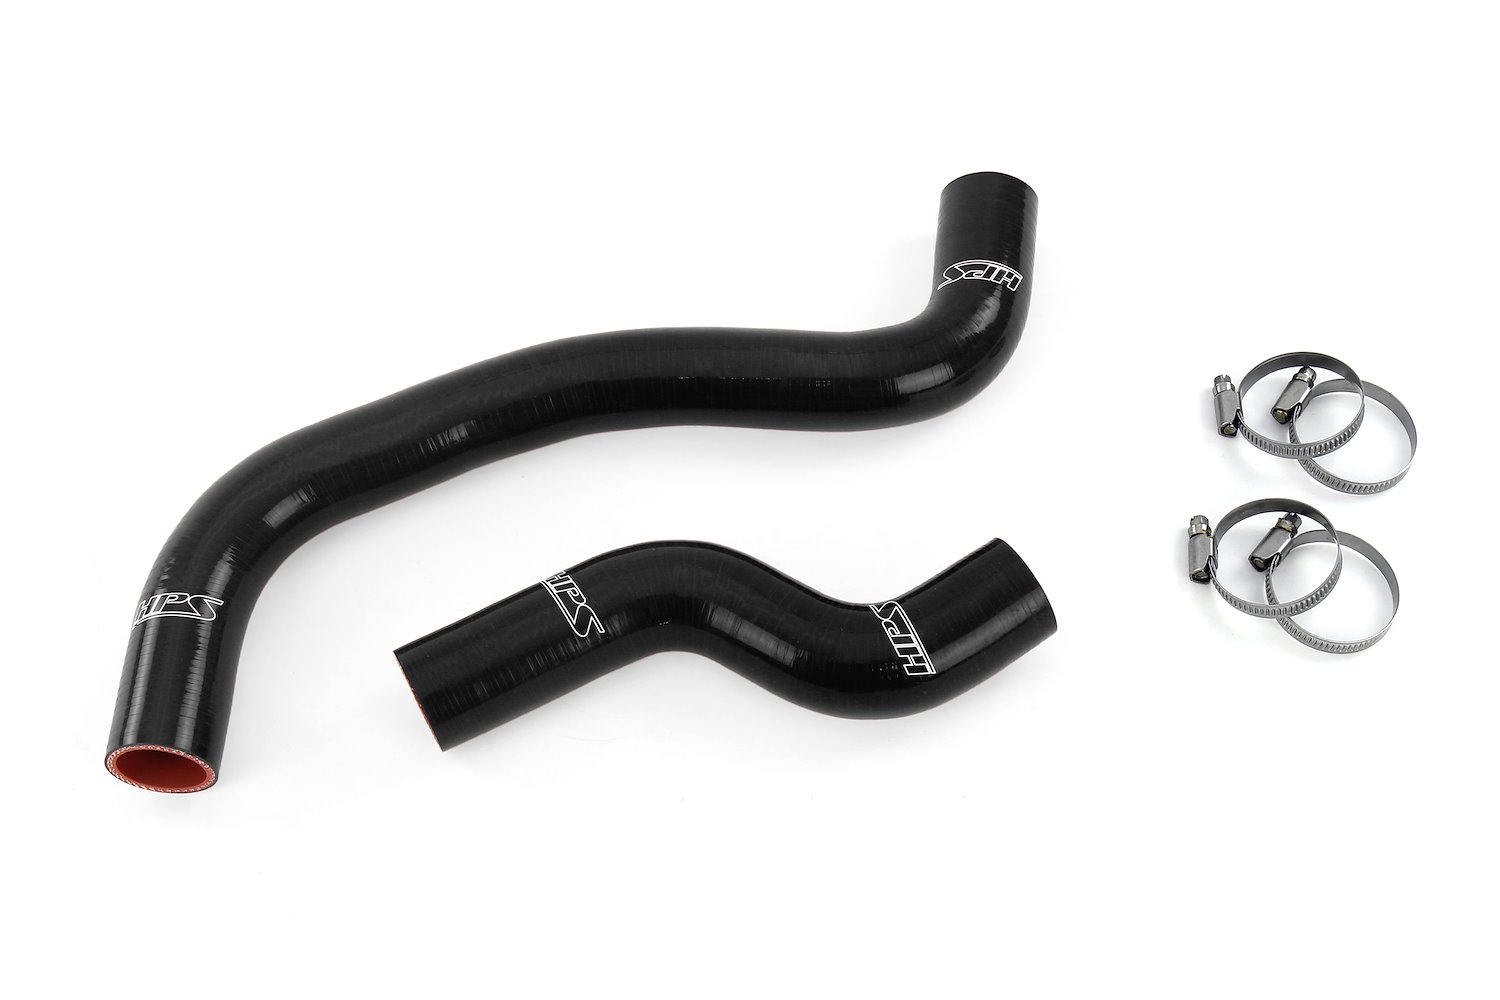 57-1081-BLK Radiator Hose Kit, 3-Ply Reinforced Silicone, Replaces Rubber Radiator Coolant Hoses